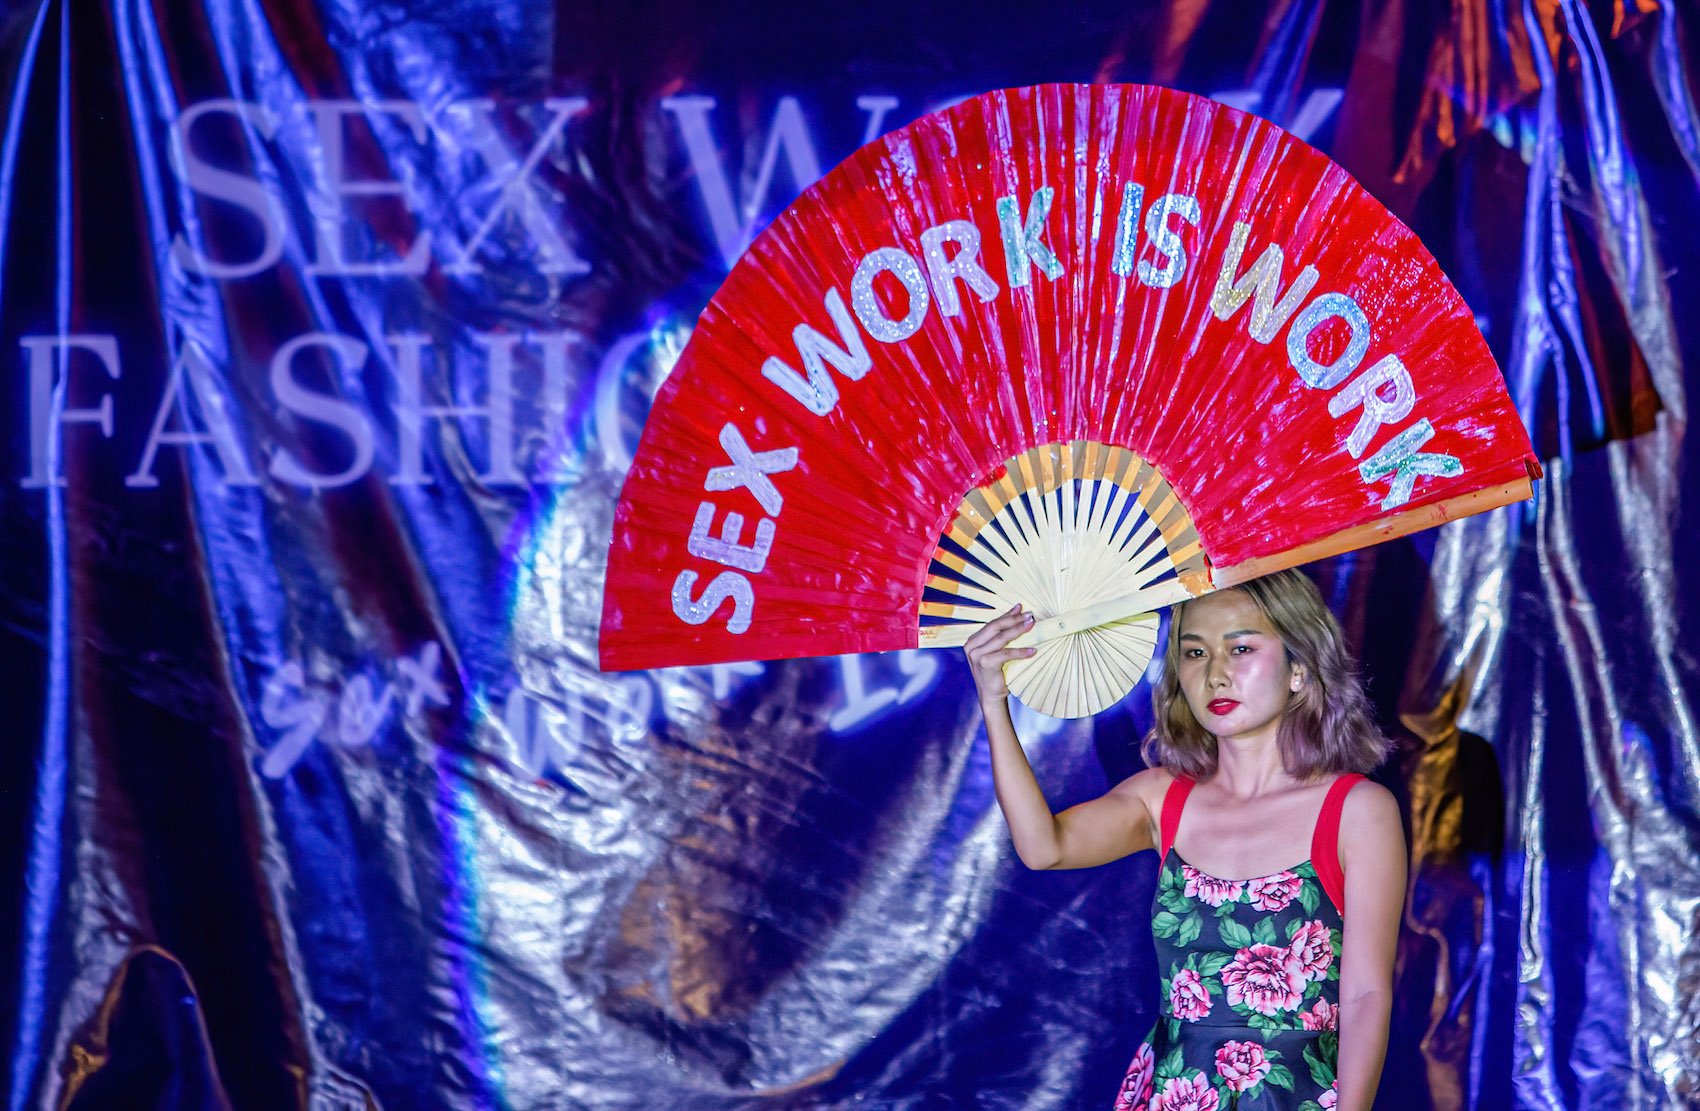 Sex Workers In Thailand Held A Fashion Show To Fight The Stigma Around Sex Work